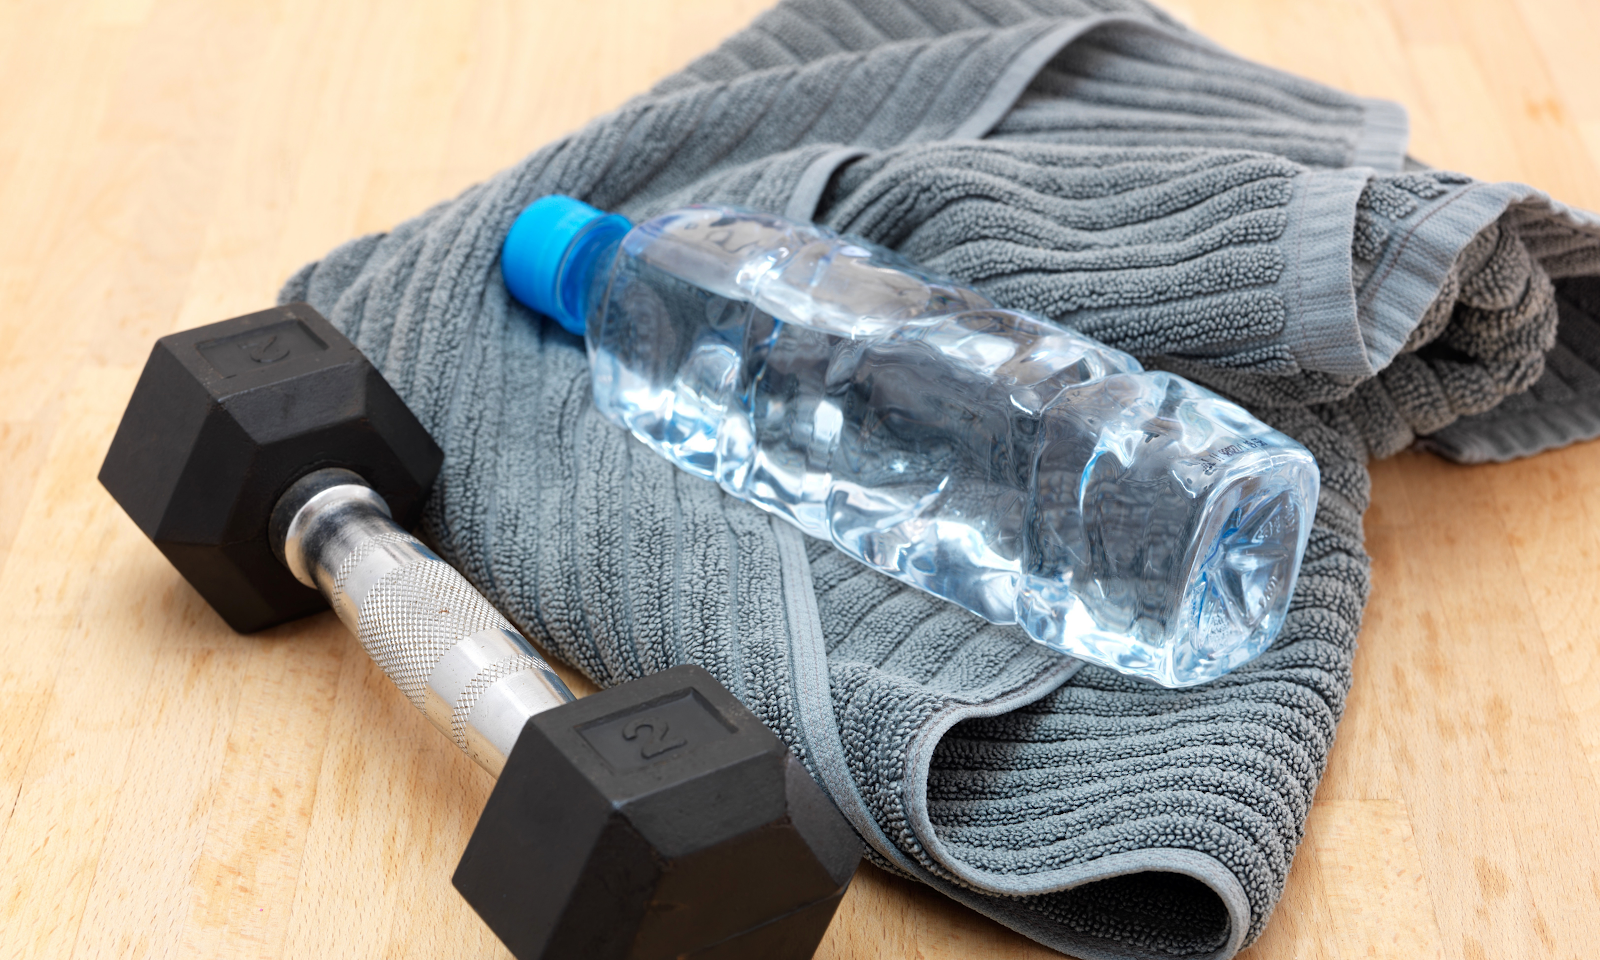 Two lb weight and water bottle with towel for exercise for metabolic weight loss